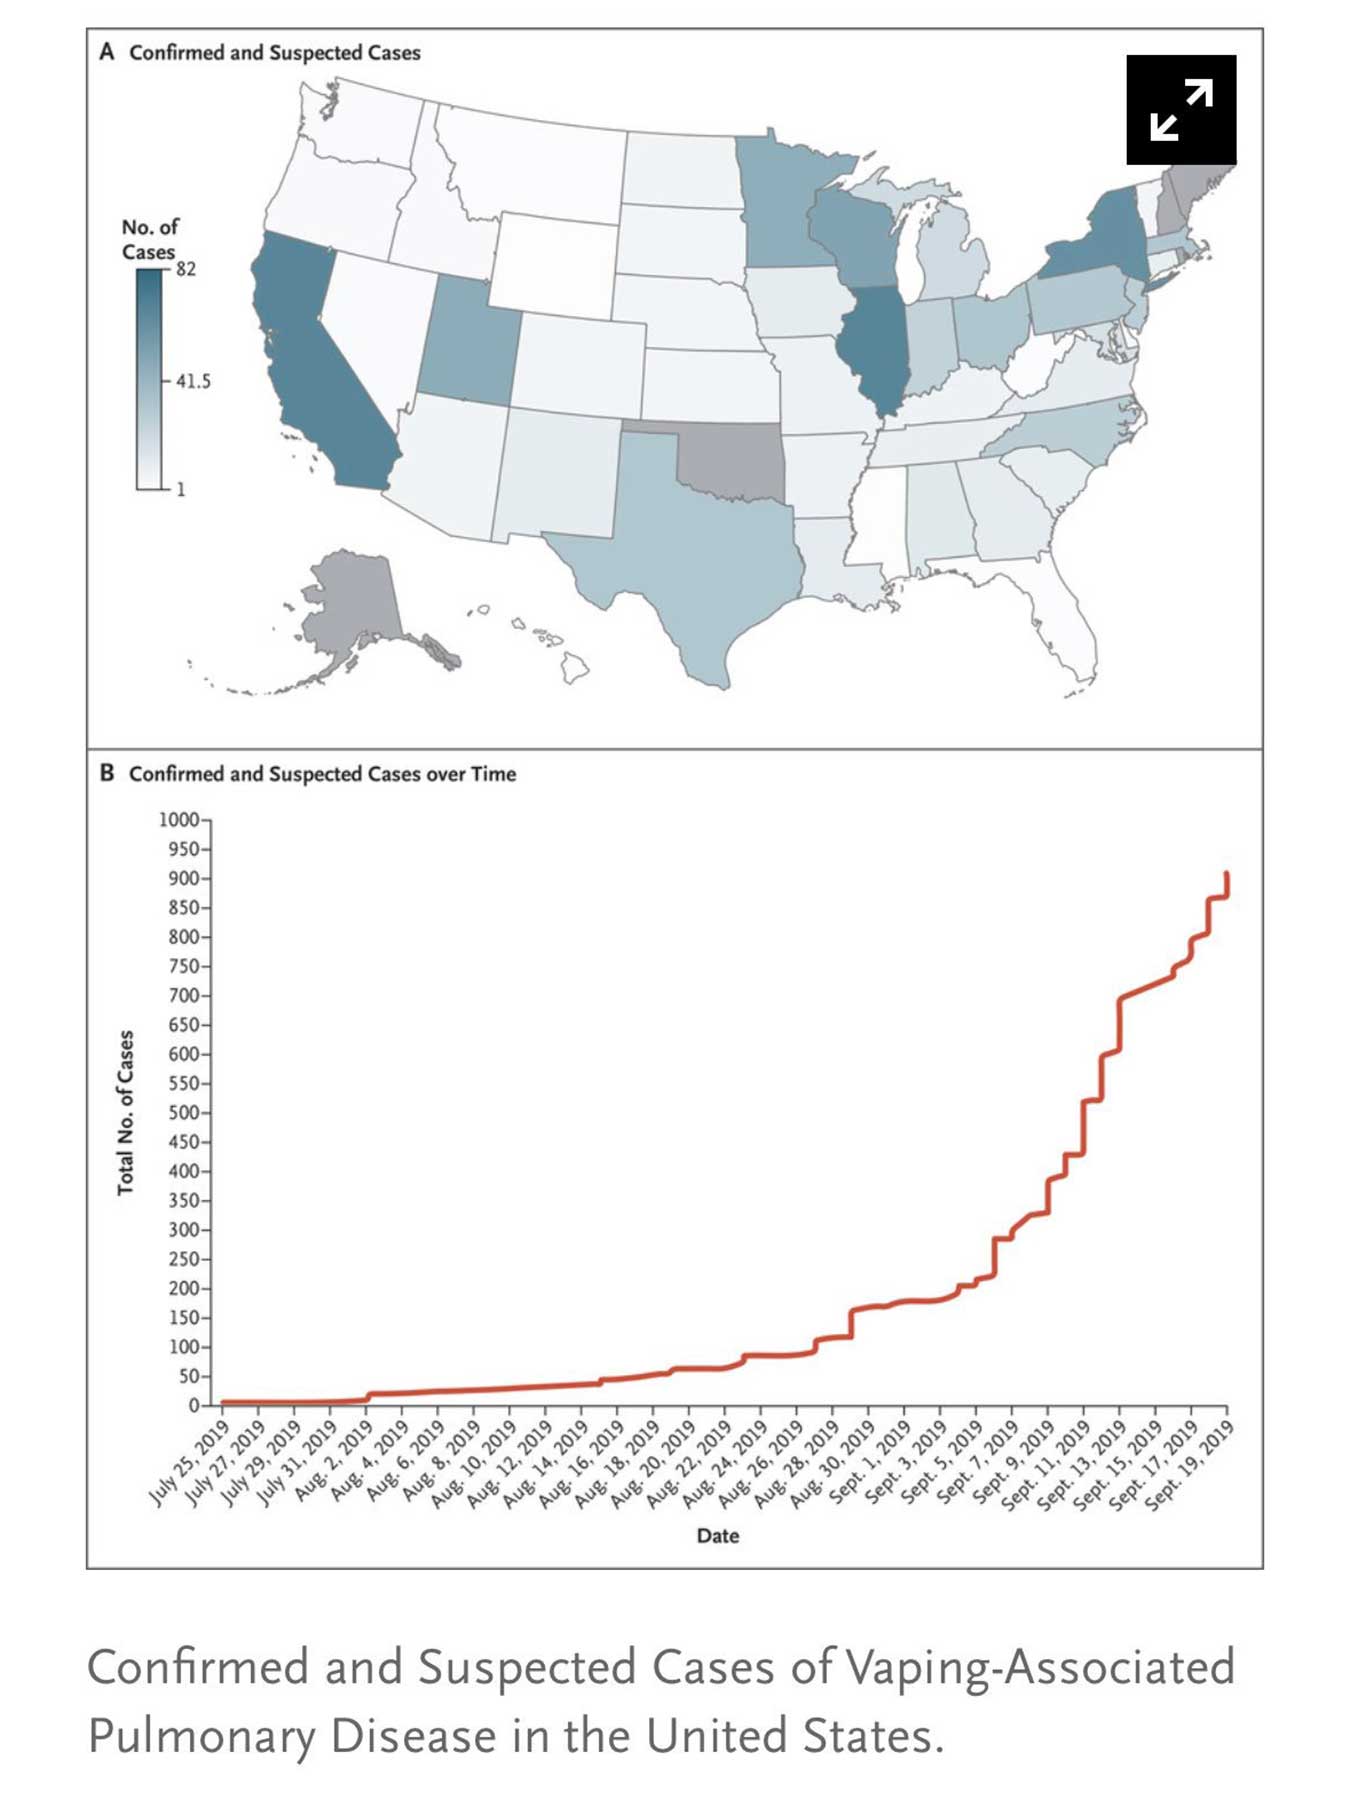 Reports of VAPI skyrocketed in the US this summer. (Courtesy NEJM)